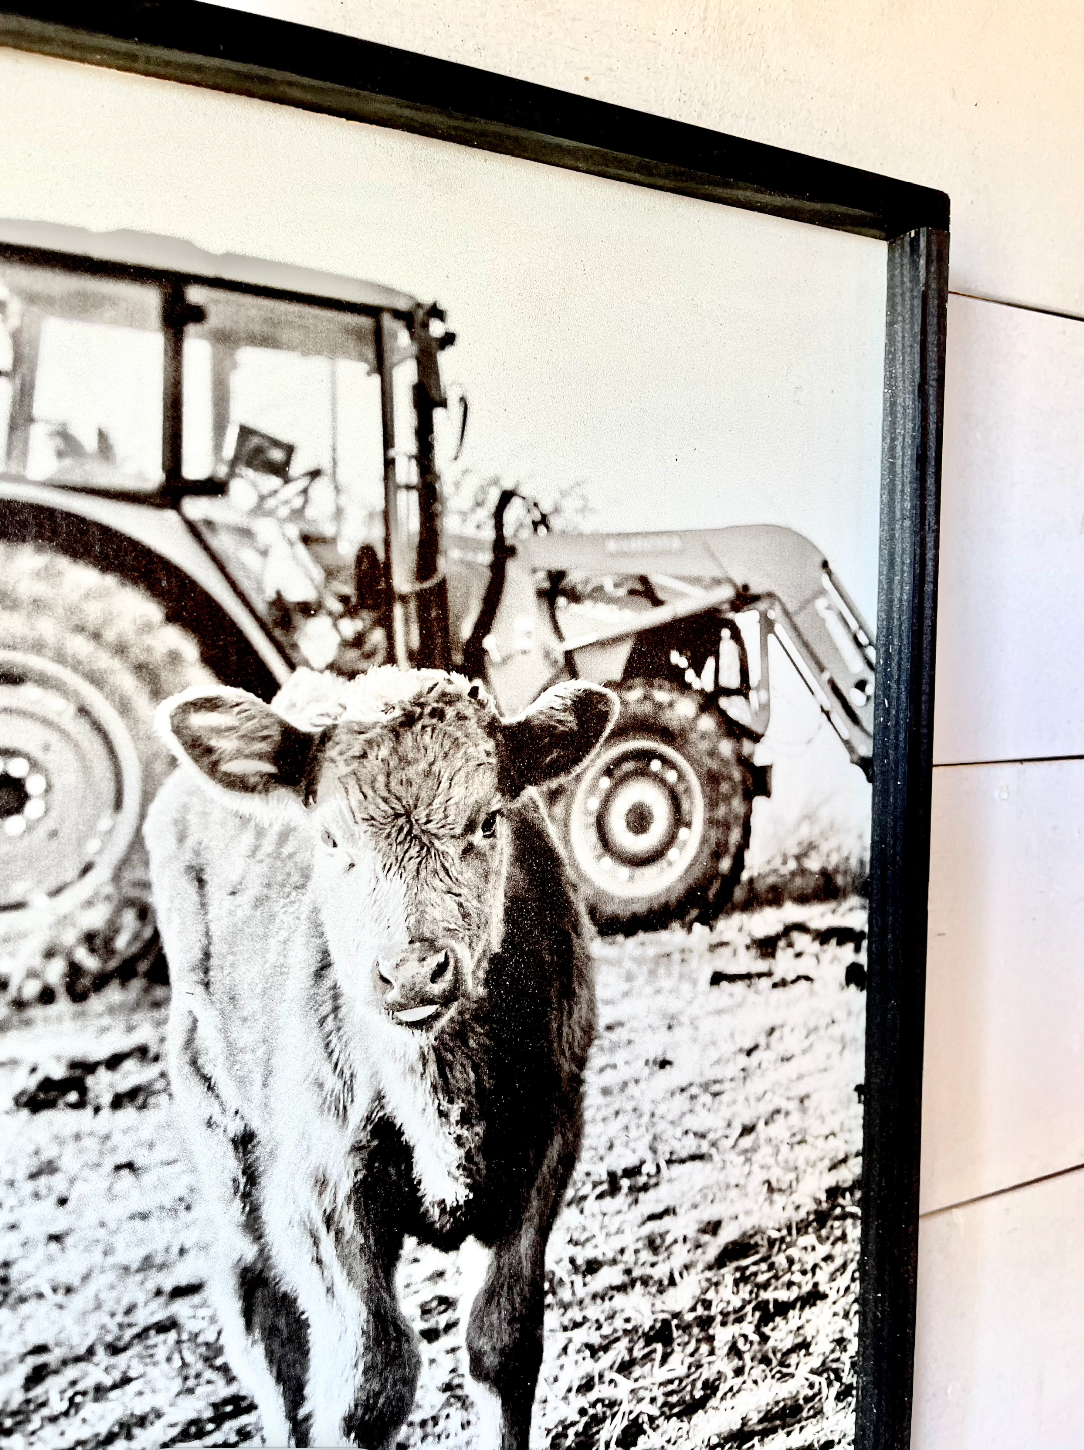 Tractor Calf Black and White Ranch Angus Calf Farm Animal wood sign Simply Country Ranch